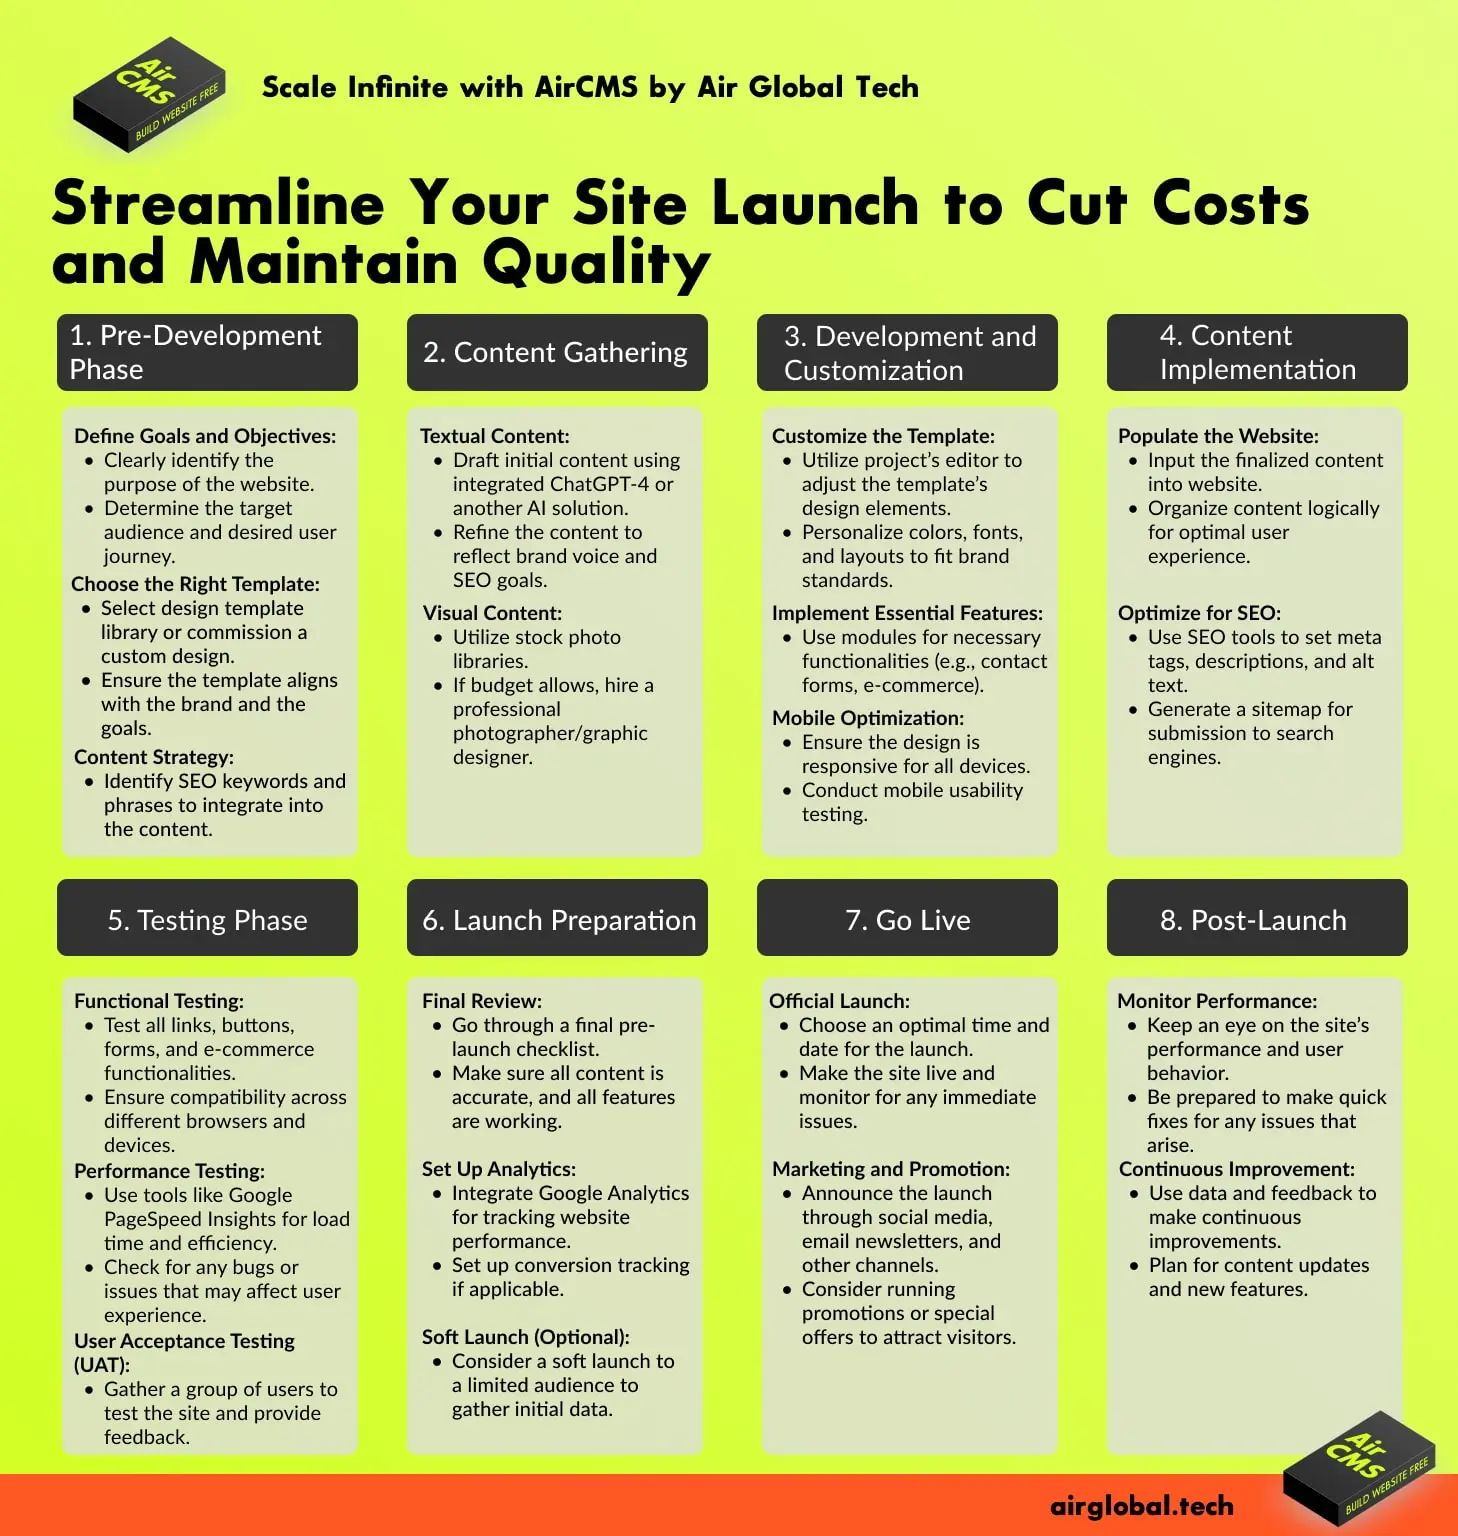 Streamlining Your Website Launch: A Strategic Guide with Air Global Tech's AirCMS